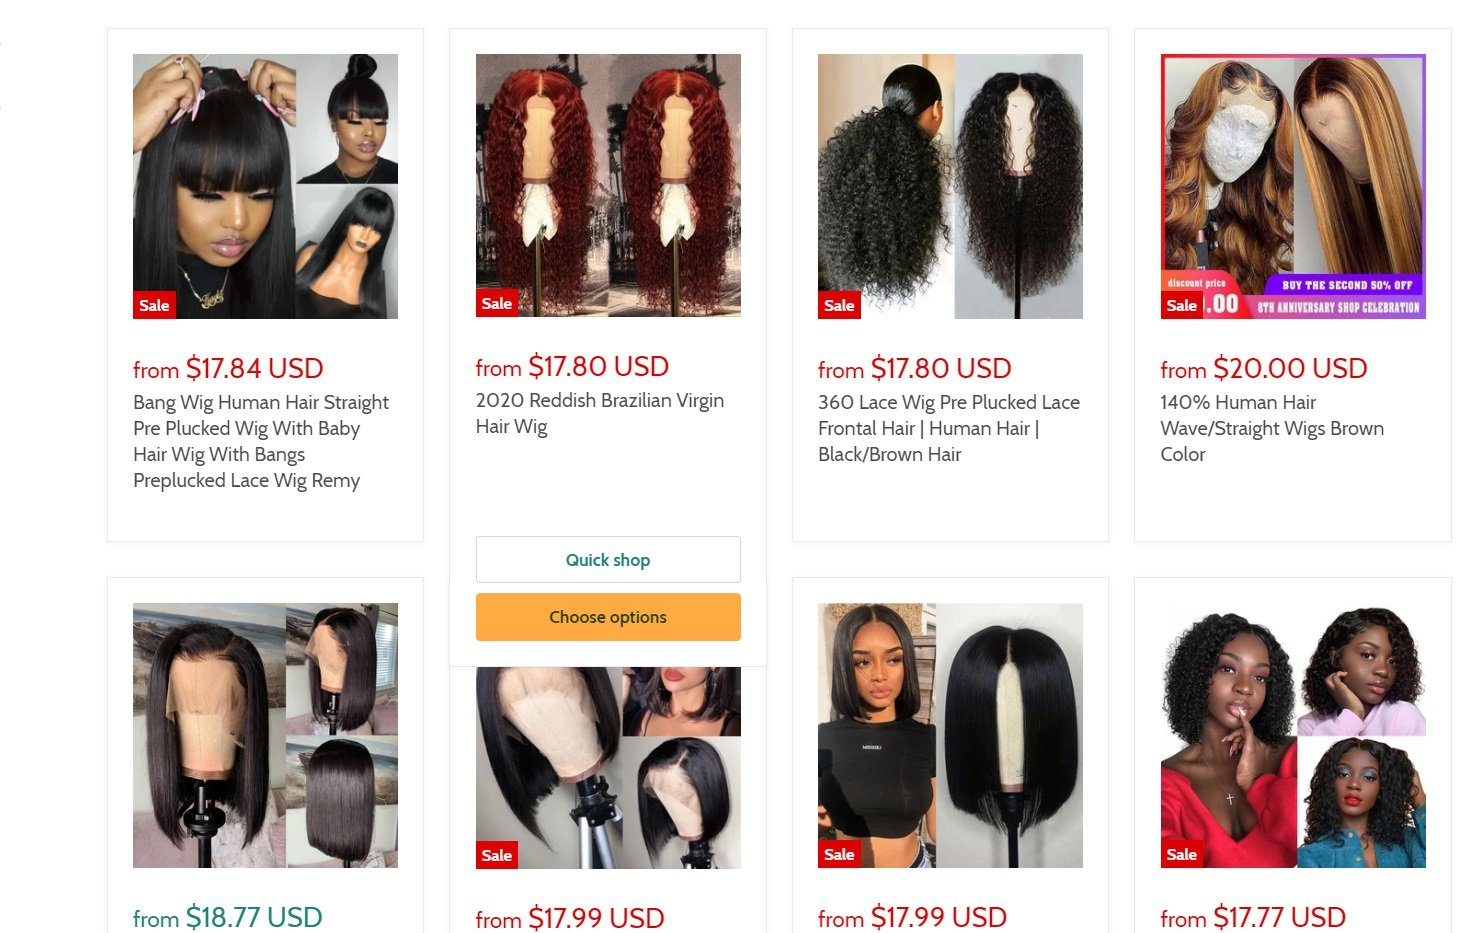 Luvwigs Shop located at luvwigs.shop